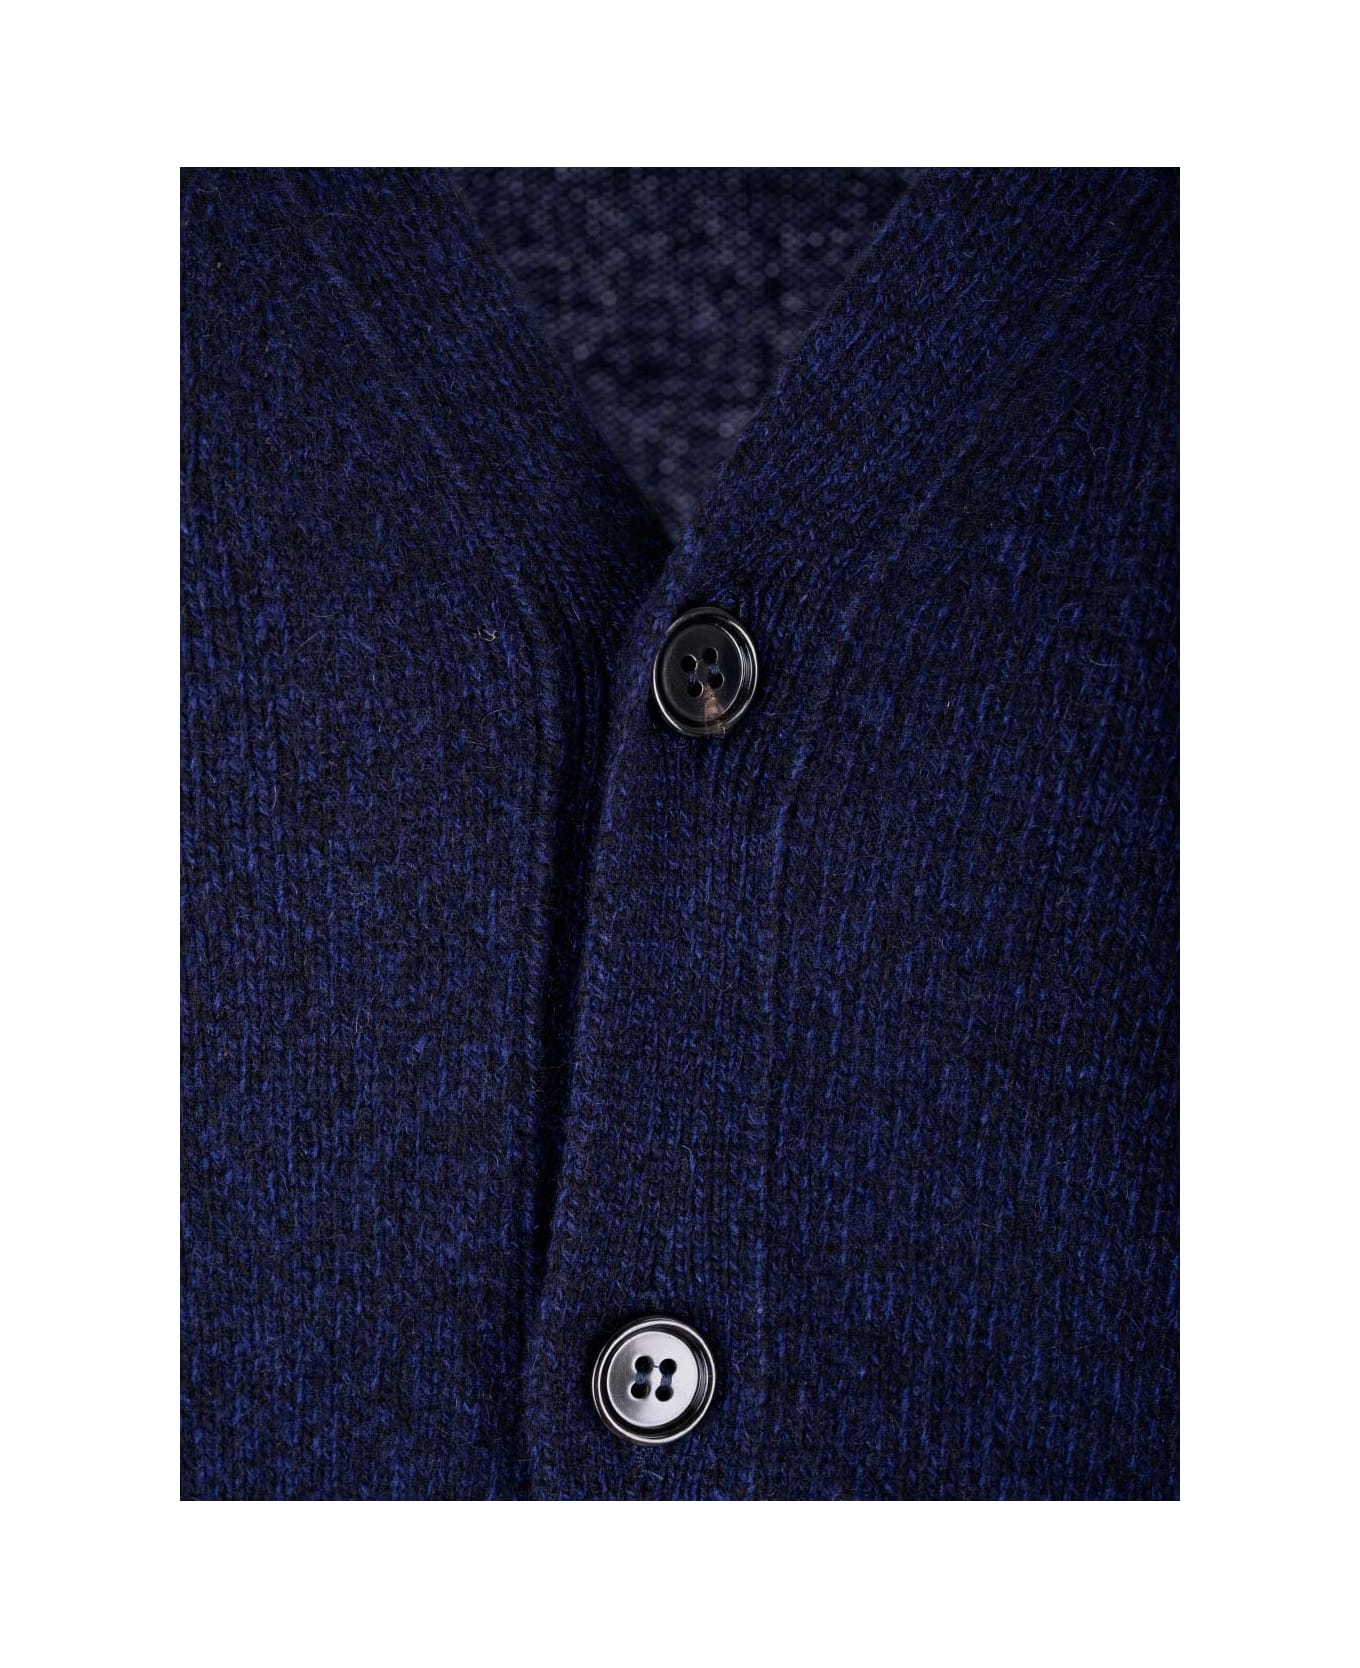 Ami Alexandre Mattiussi Blue Cashmere And Wool Cardigan - NAVY